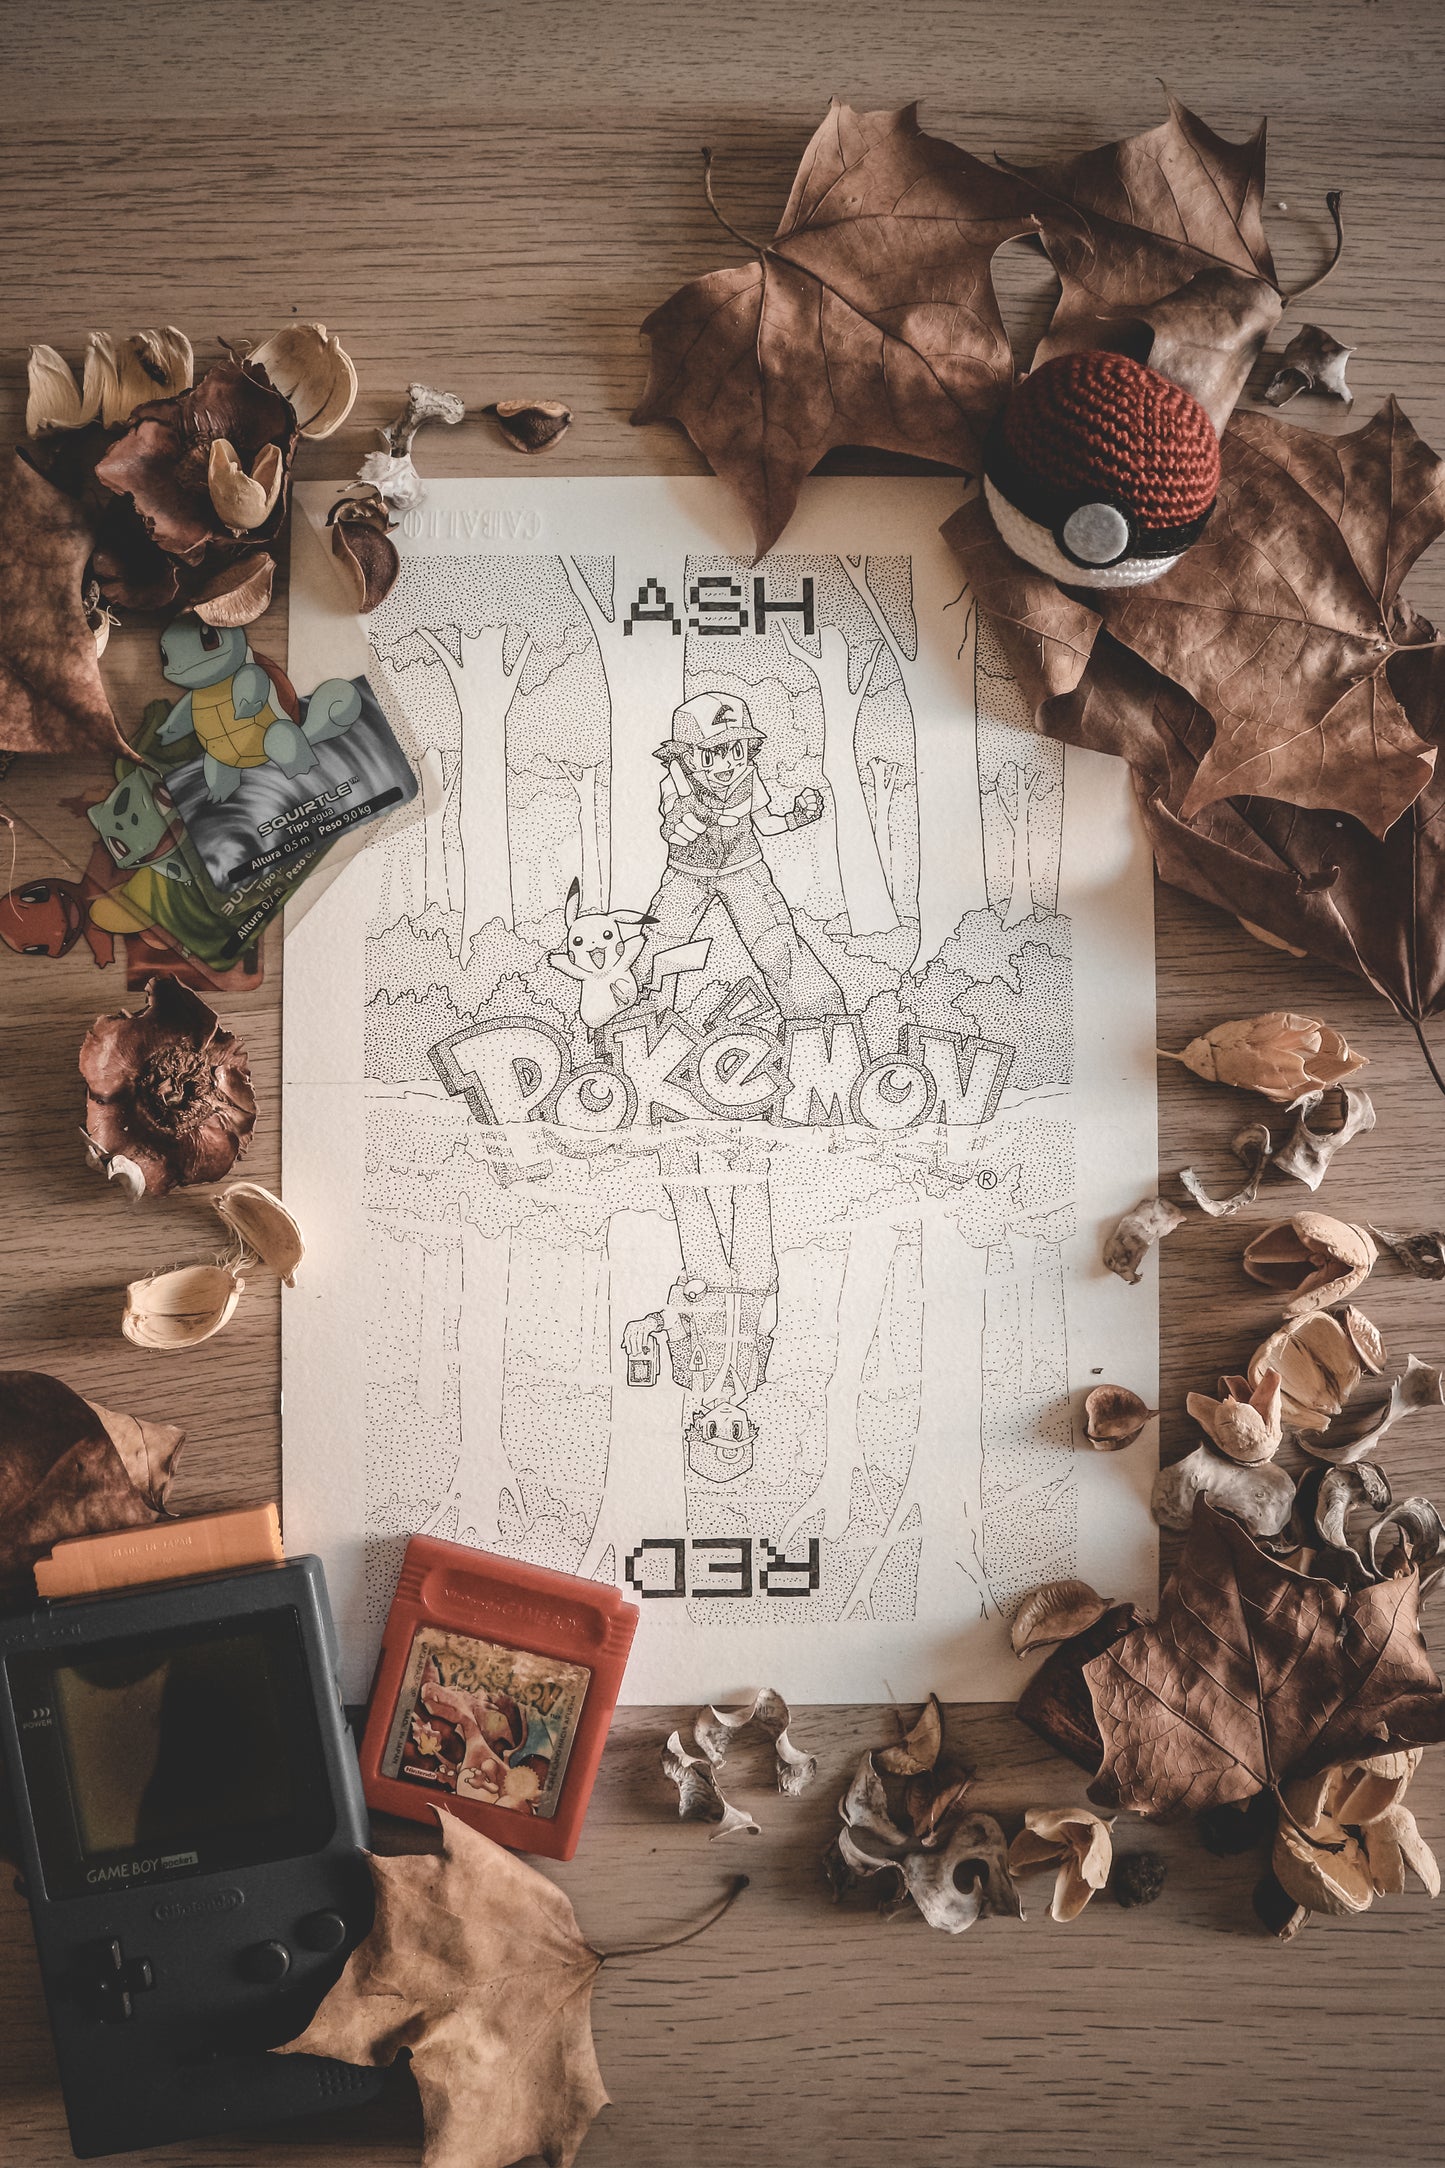 Pokémon - Ash and Red